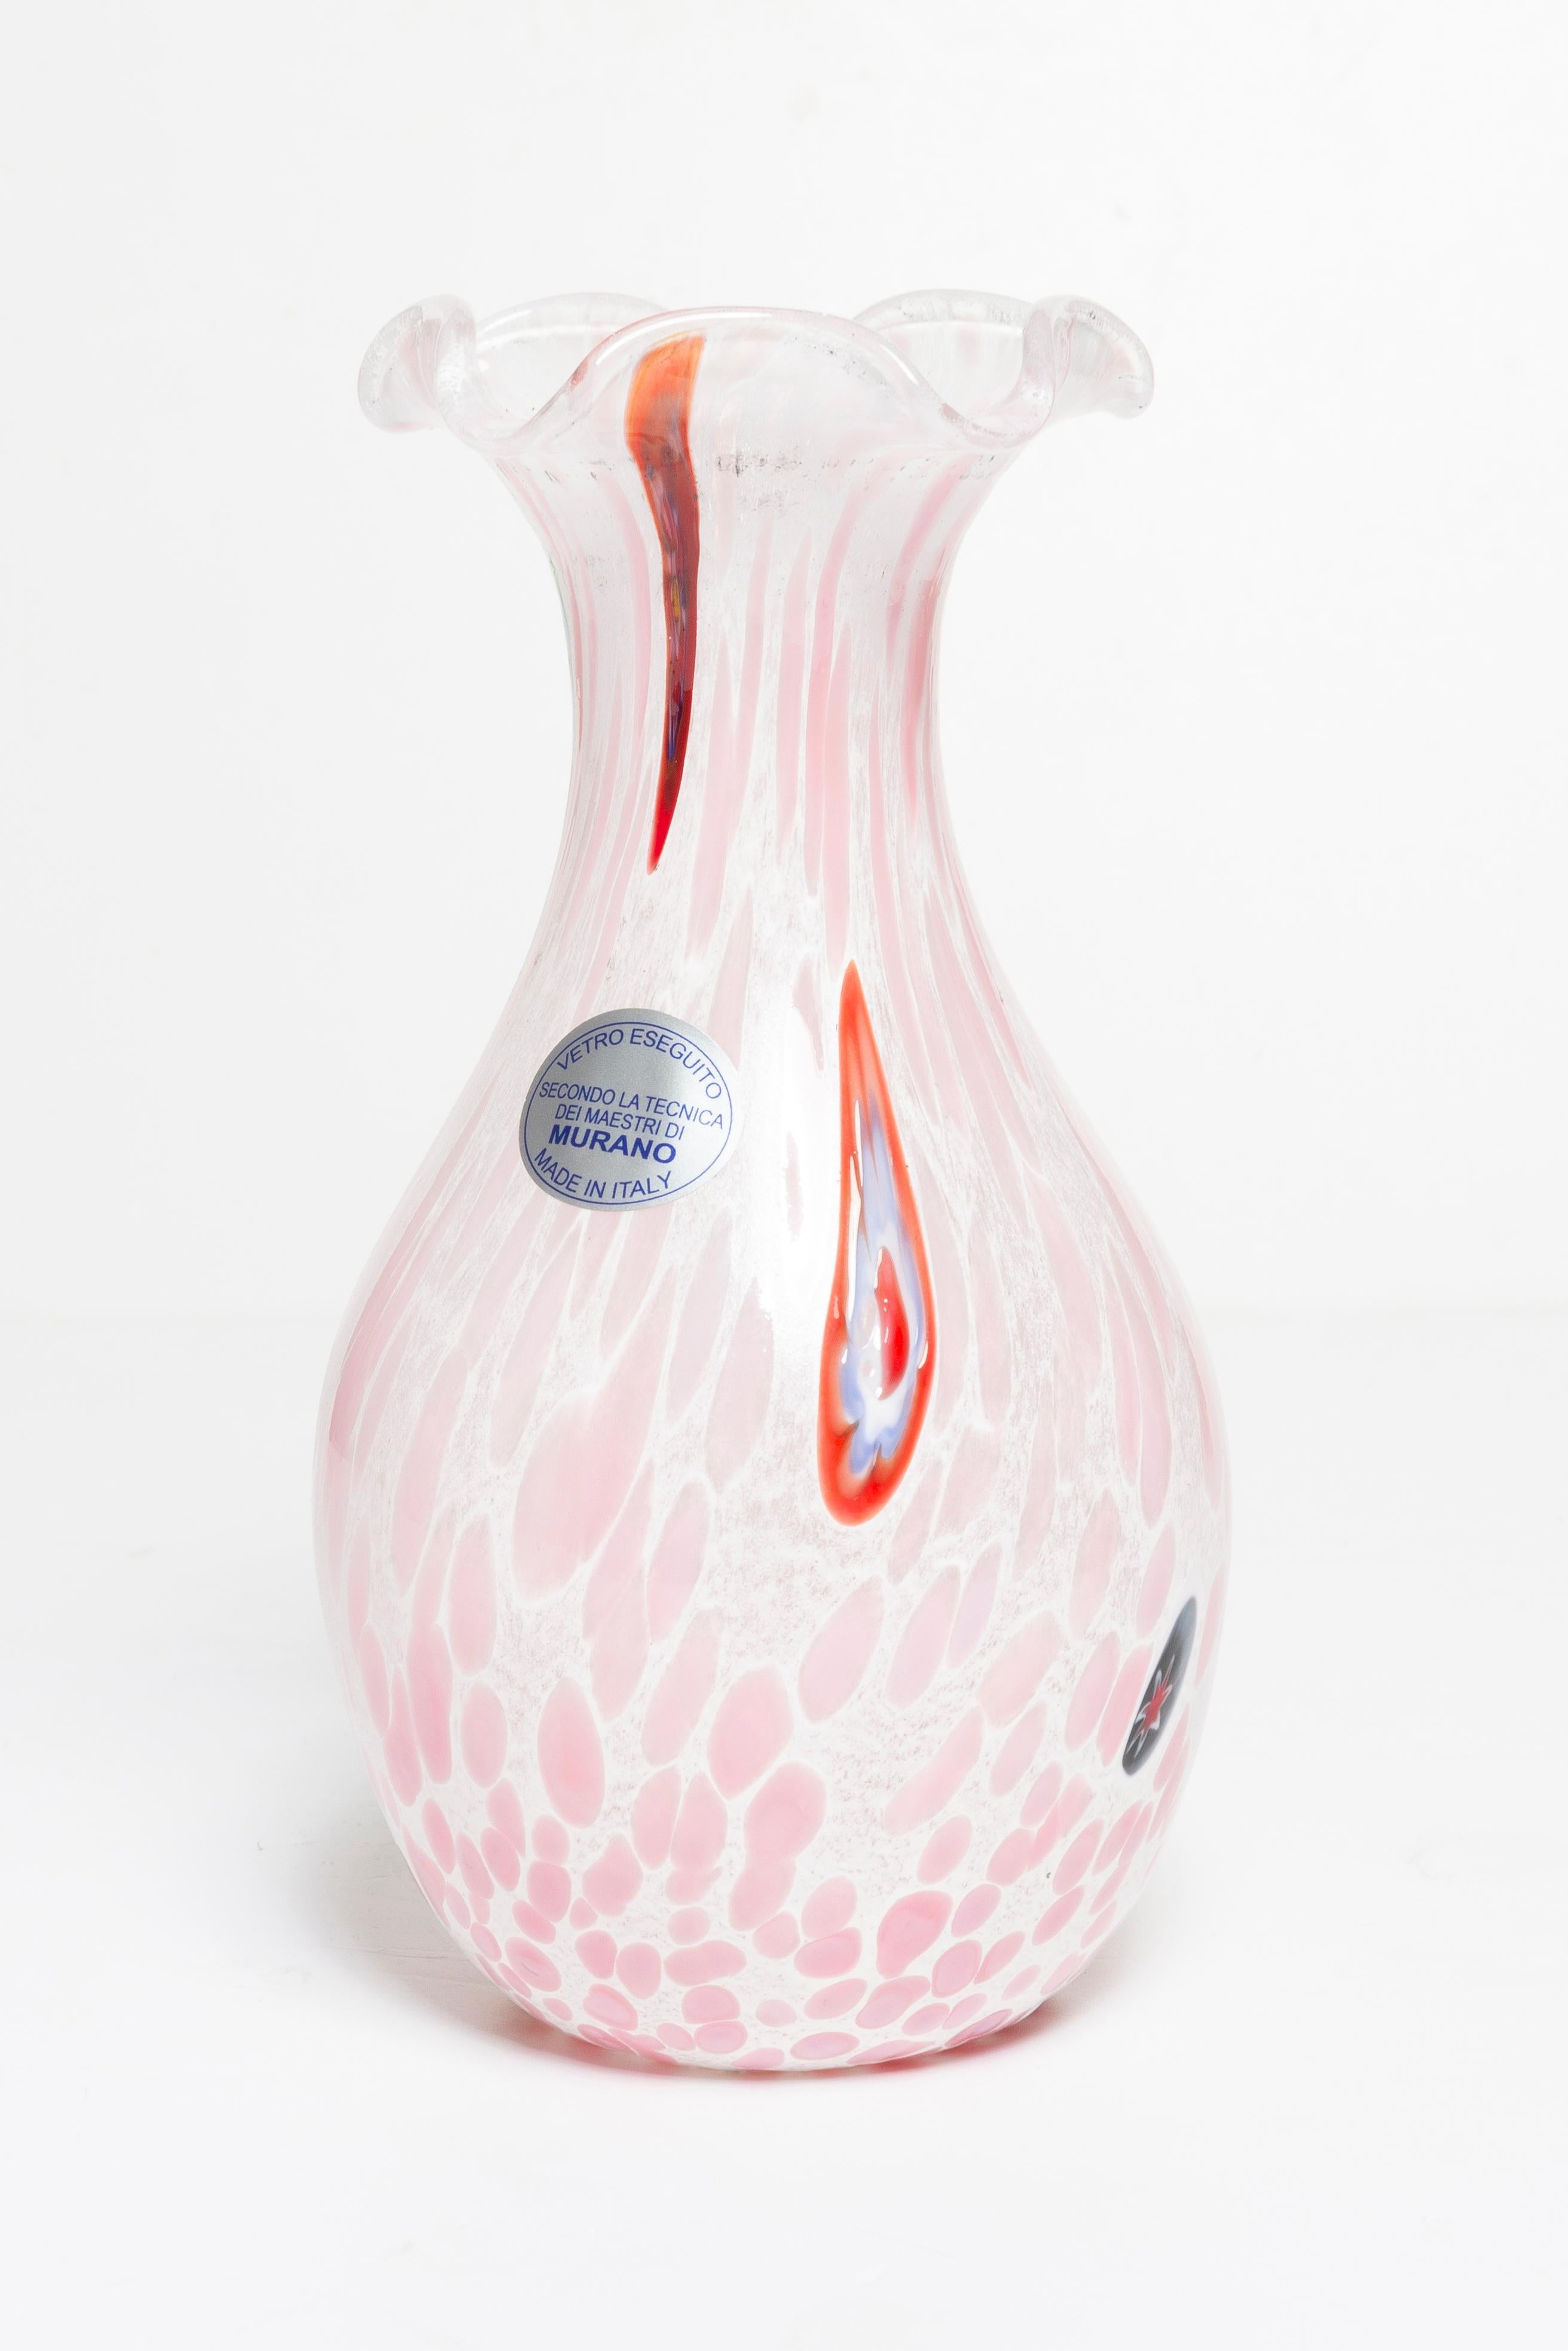 Mid-Century Modern Mid Century Vintage White and Pink Dots Murano Vase, Italy, 1960s For Sale